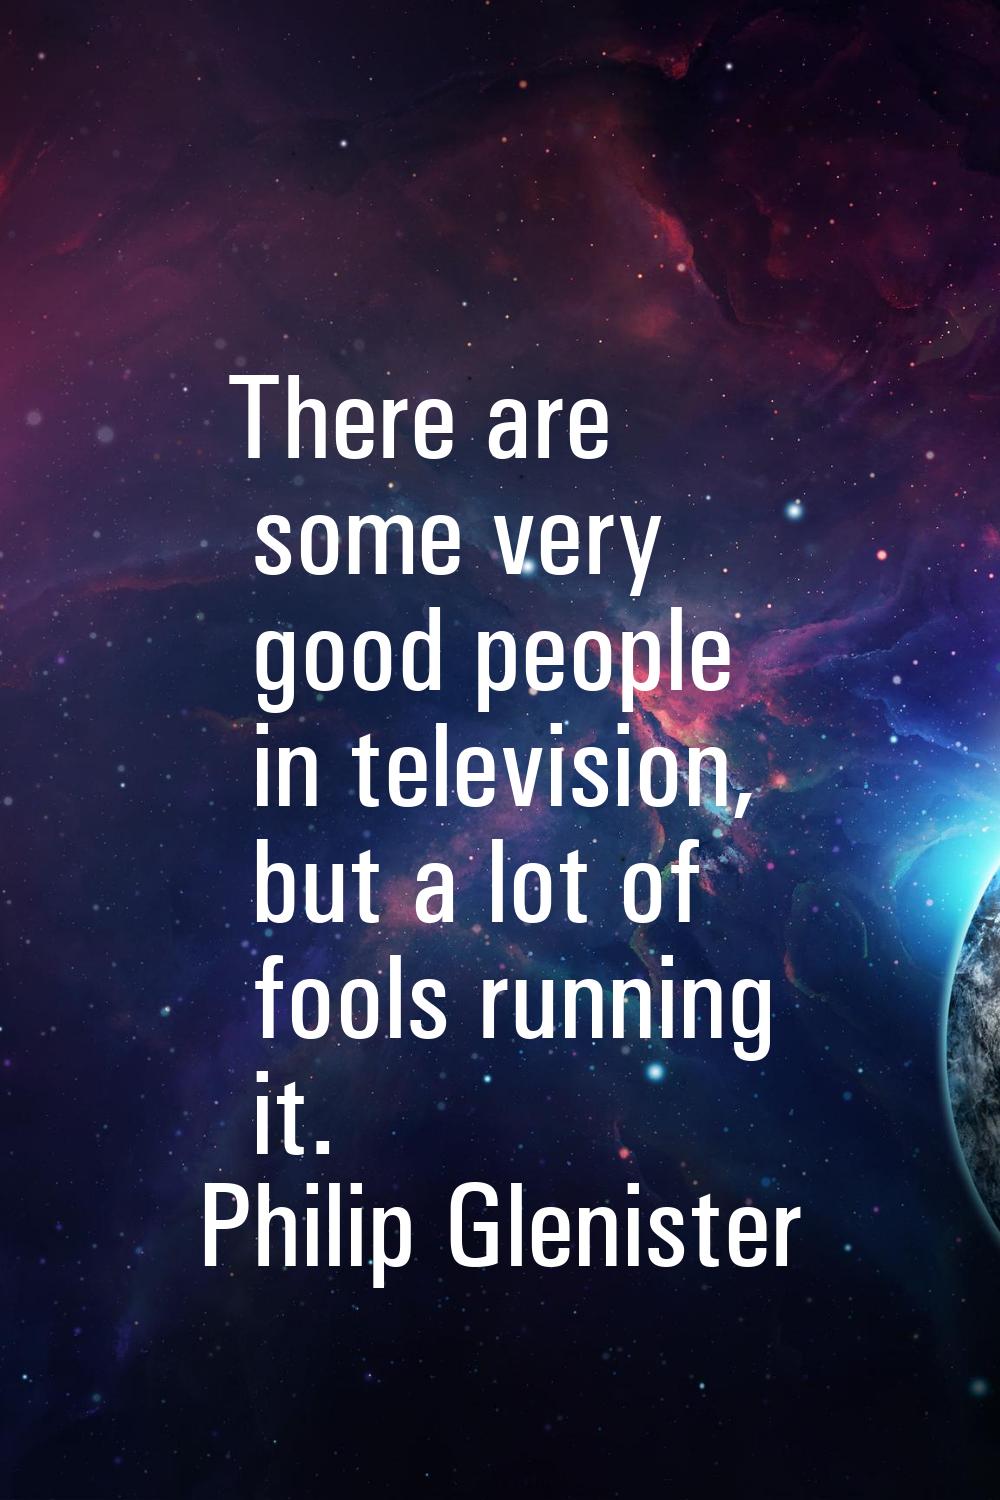 There are some very good people in television, but a lot of fools running it.